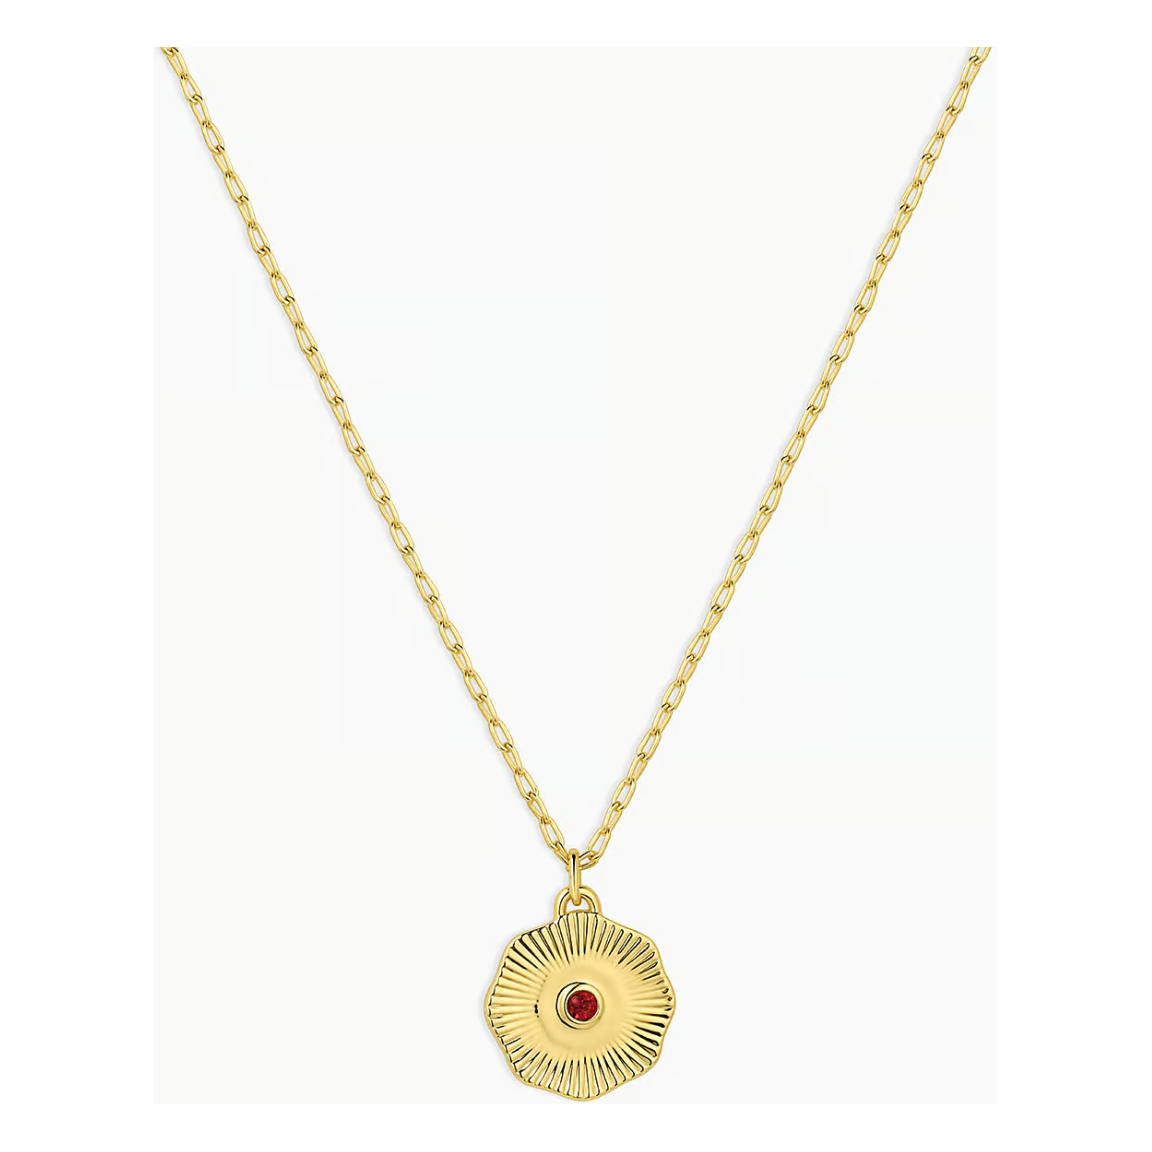 Birthstone Coin Necklace - January